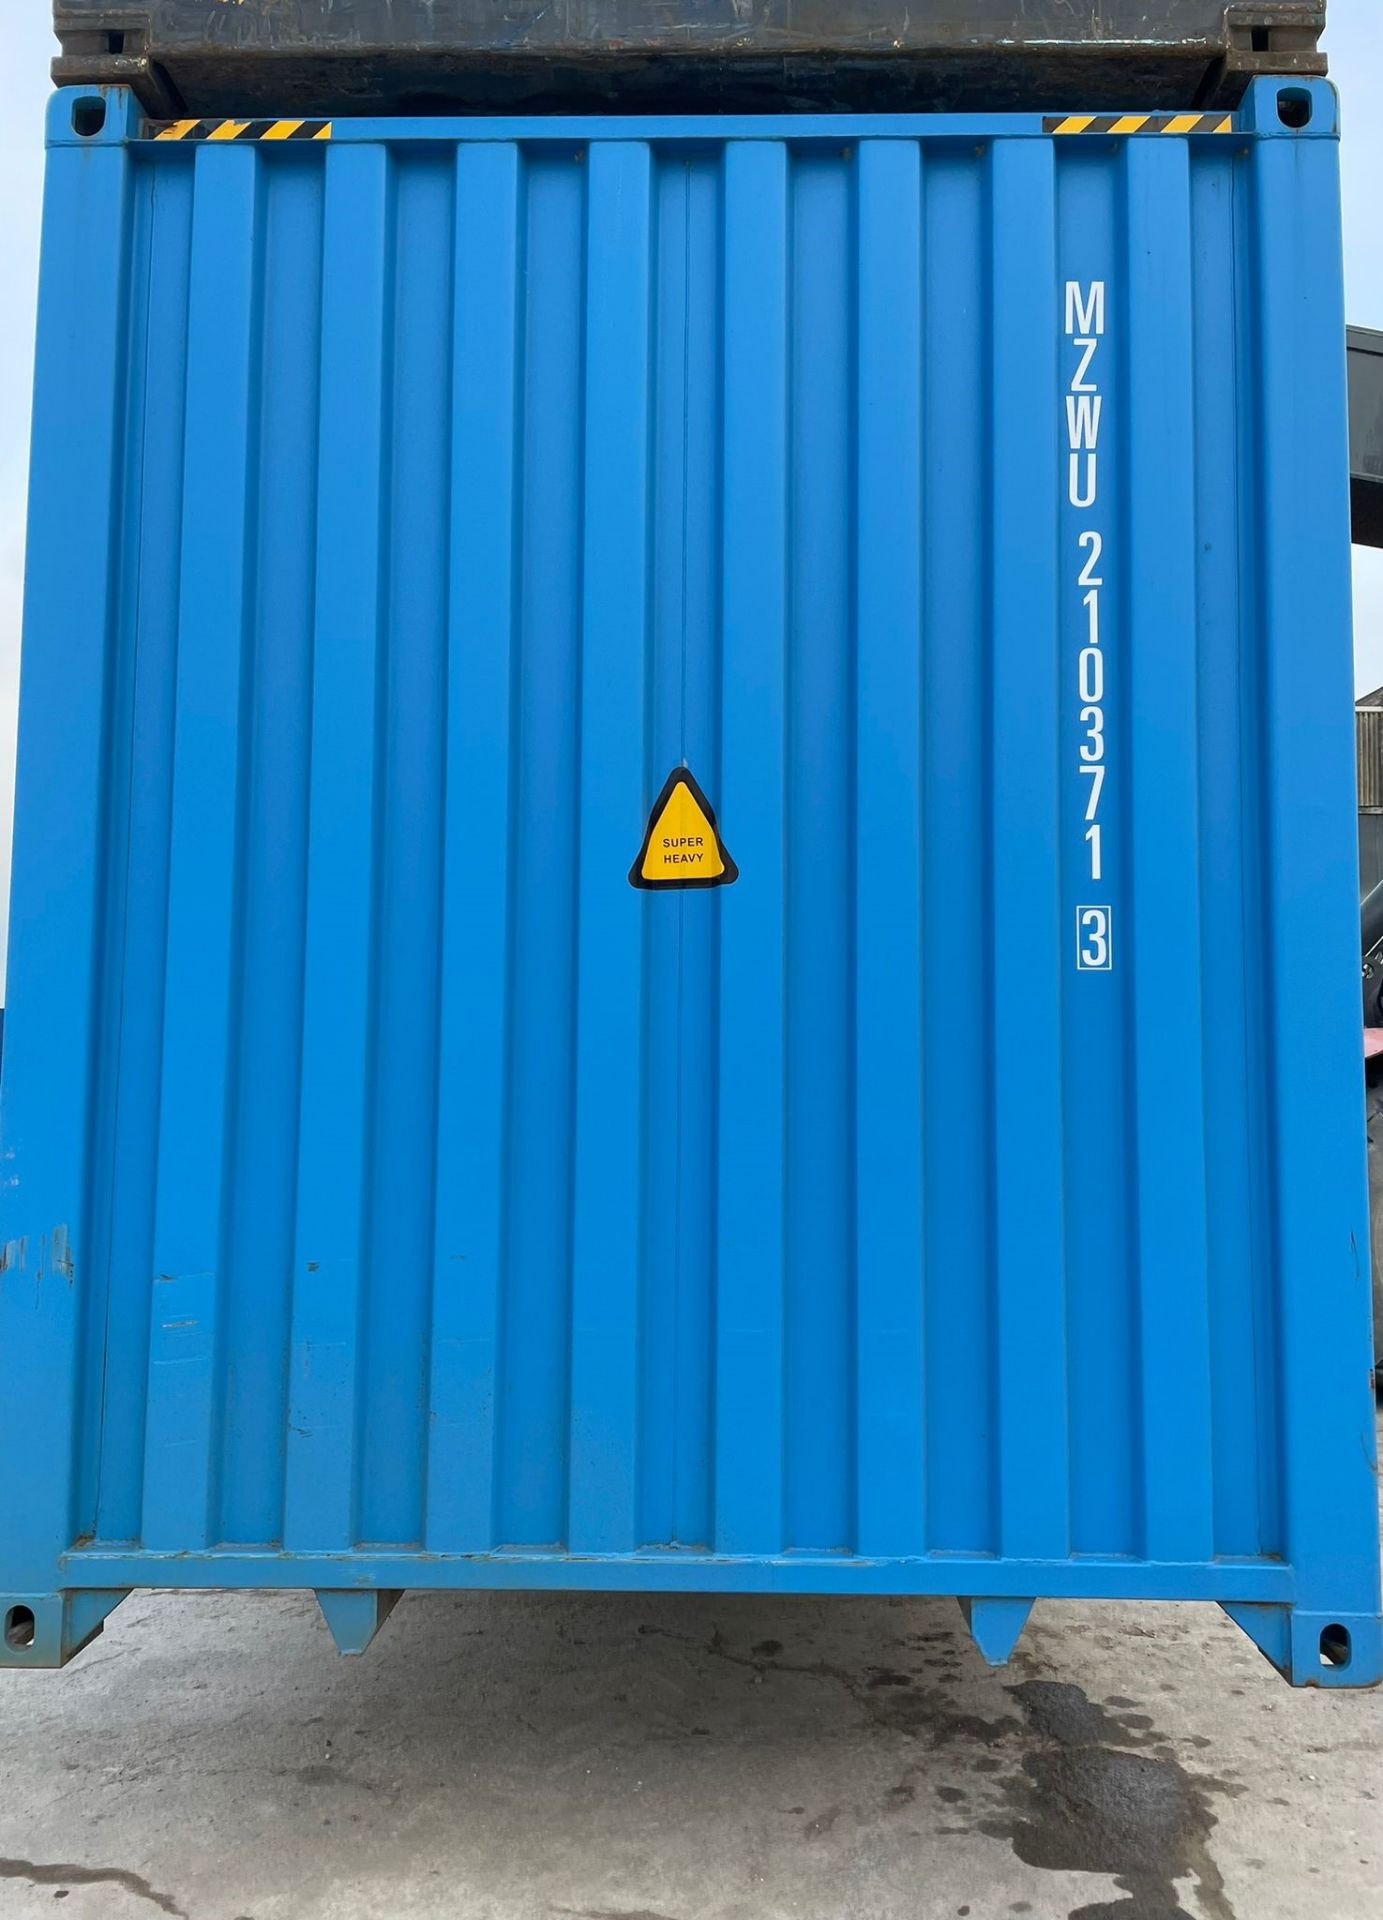 40ft HC Shipping Container - ref MZWU2103713 - Image 5 of 5